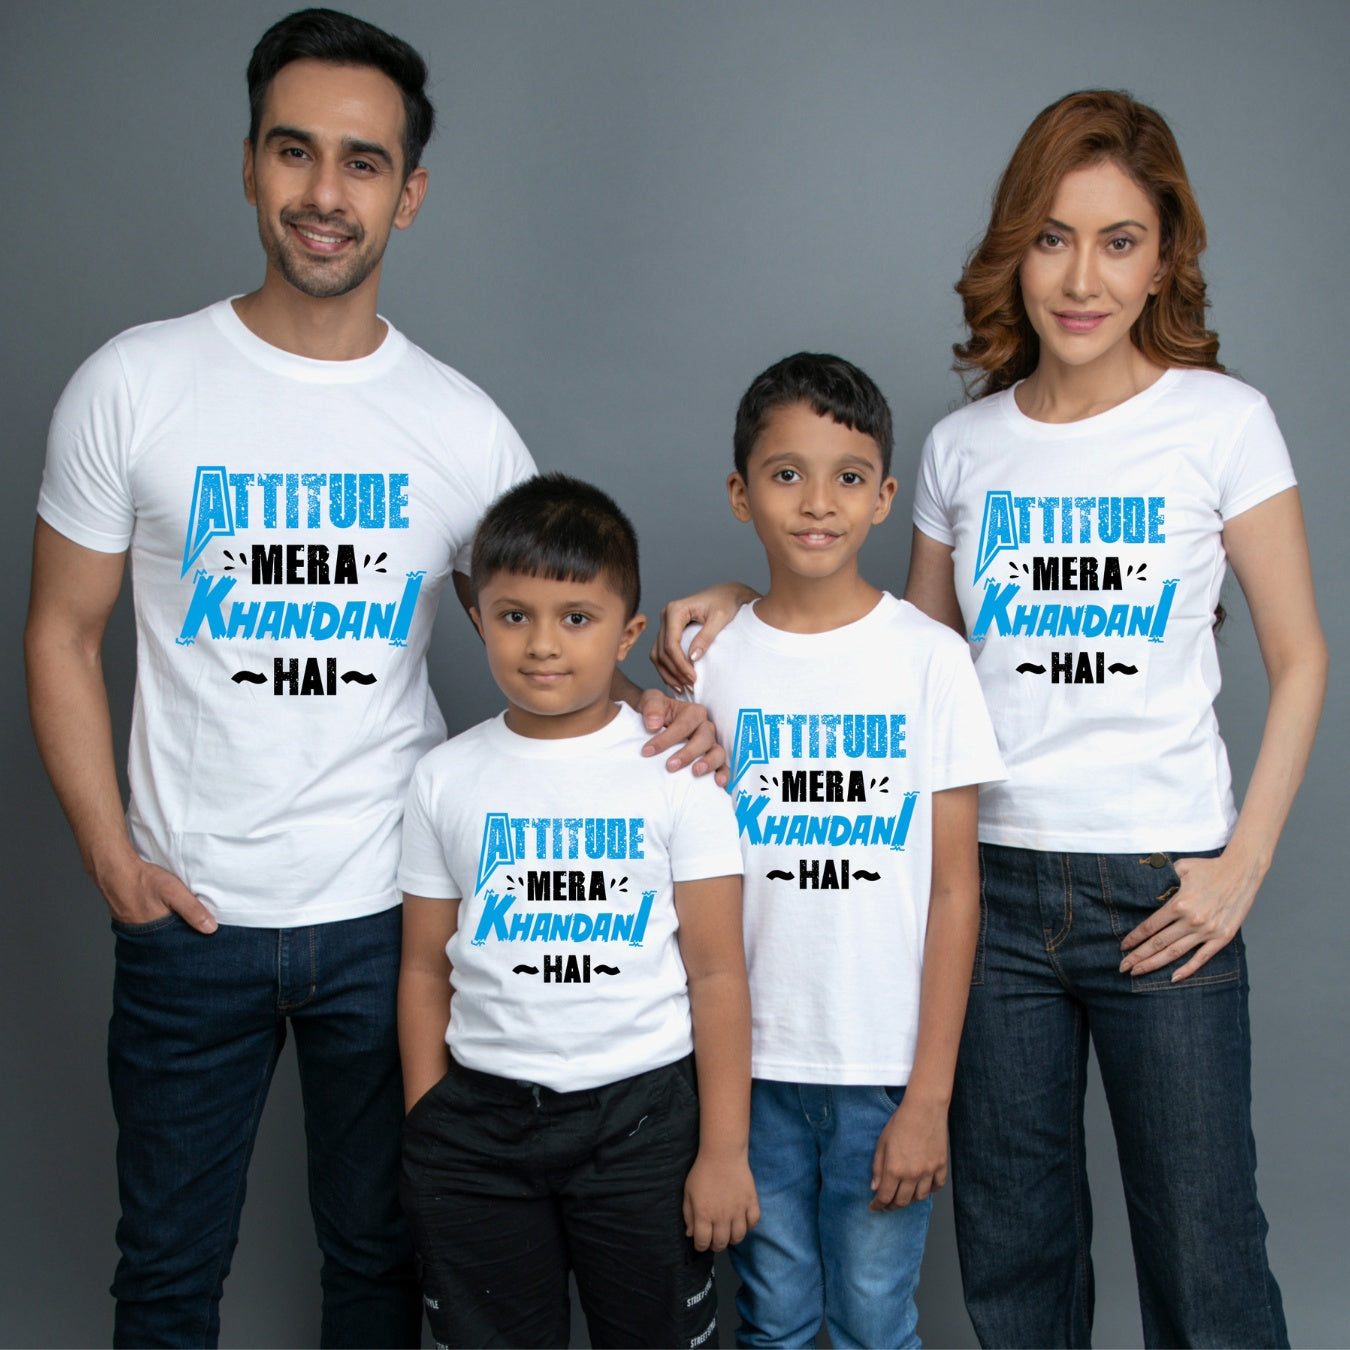 Family t shirts set of 4 Mom Dad Two Sons in White Colour - Attitude Mera Khandani Hain Variant